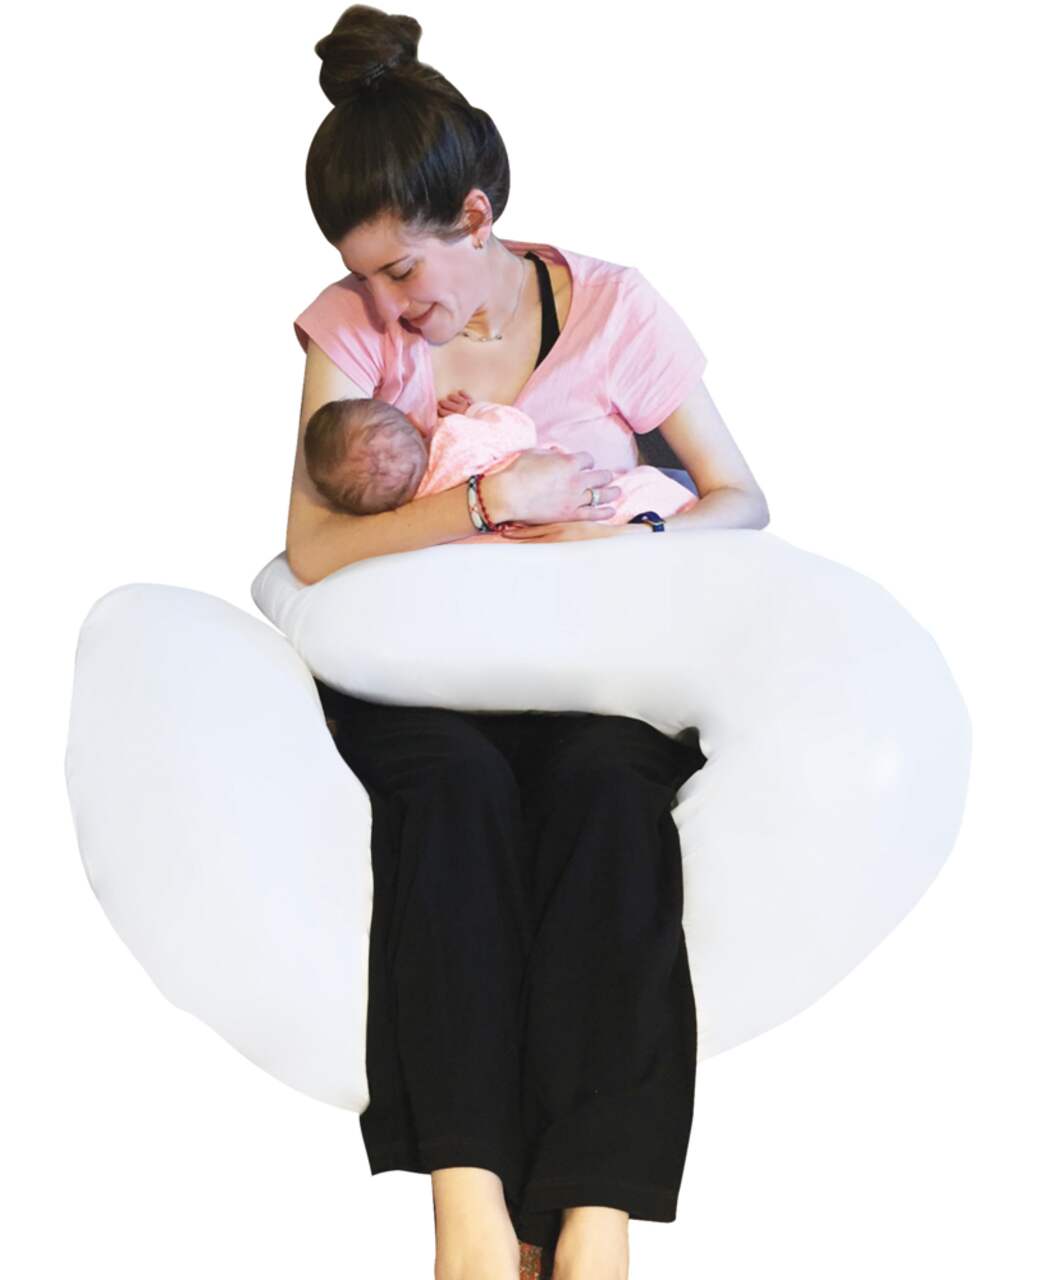 Pin by Katy Miti on Baby & Maternity  Pregnancy pillow, Wedge pillow,  Treggings